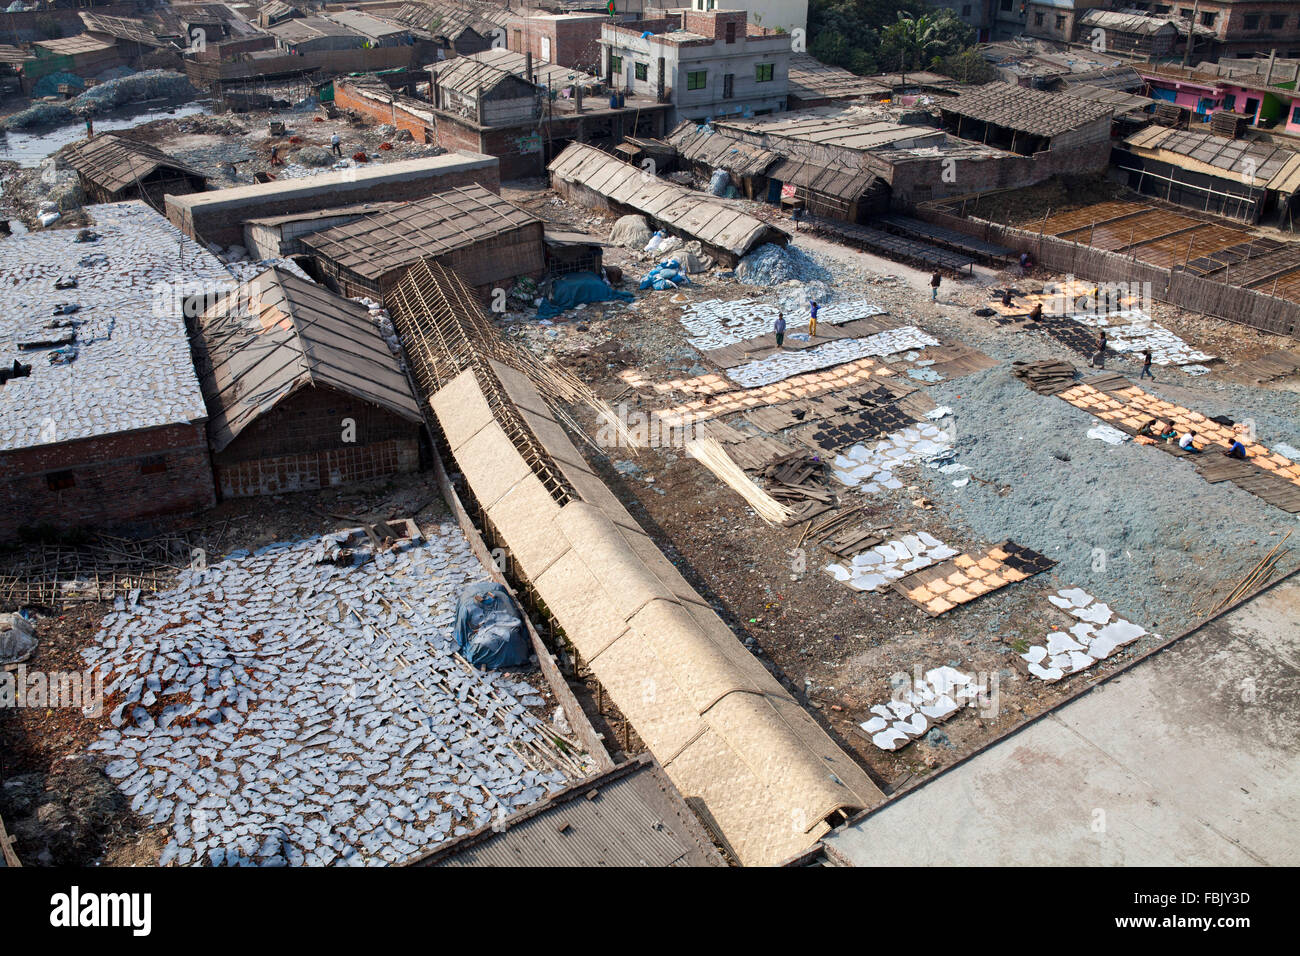 DHAKA, BANGLADESH 11th January 2016: Areal shot of Hazaribagh Tannery in Dhaka on January 11, 2016.  Industries Minister Amir Hossain Amu has ordered tannery owners to move their establishments within 72 hours from Hazaribagh to the Leather Industrial City at Savar on the outskirts of Dhaka.  Dhaka's Hazaribagh area, widely known for its tannery industry, has been listed as one of the top 10 polluted places on earth with 270 registered tanneries in Bangladesh, and around 90-95 percent are located at Hazaribagh employing 8,000 to 12,000 people. Stock Photo